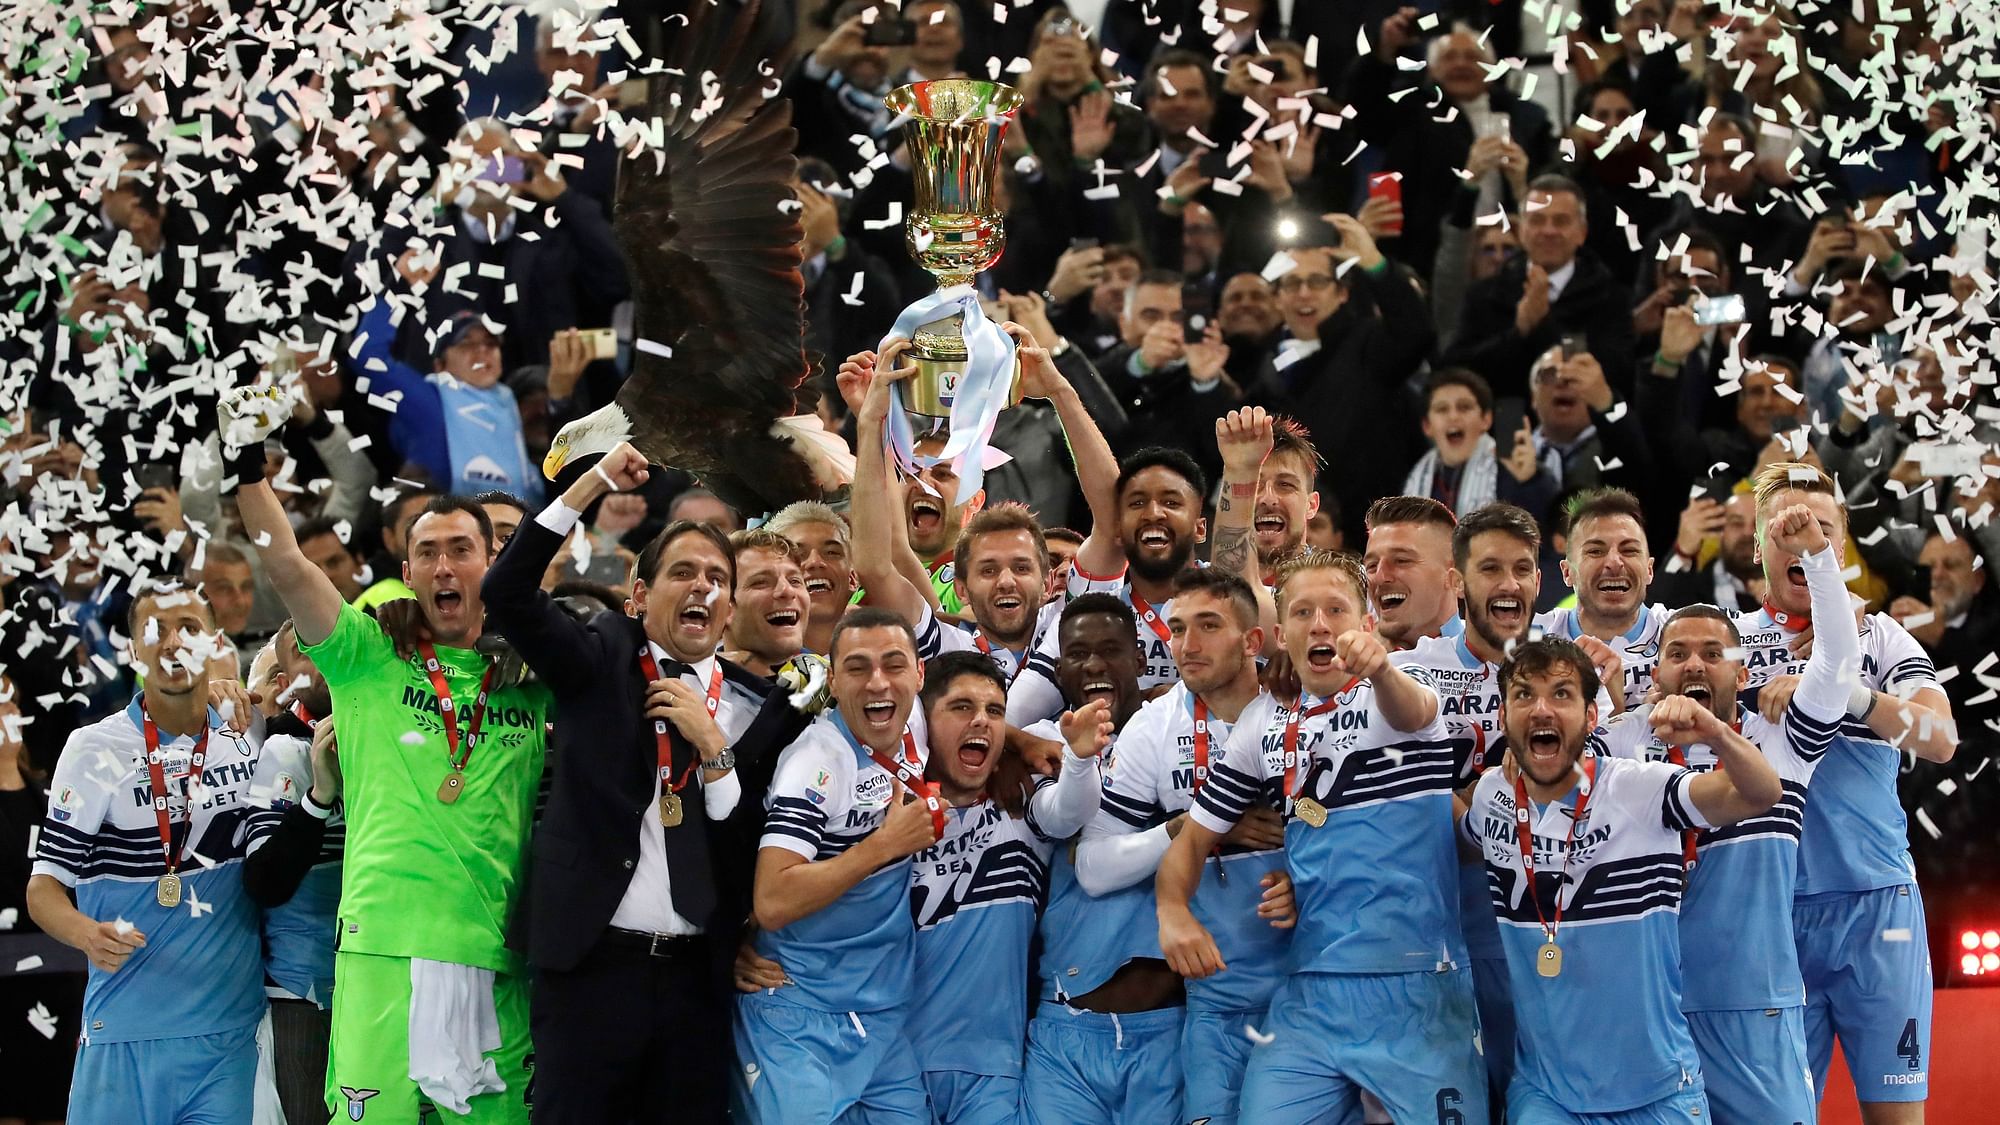 Sergej Milinkovic-Savic scored moments after coming off the bench to lead Lazio to a 2-0 win over Atalanta in the Italian Cup final.